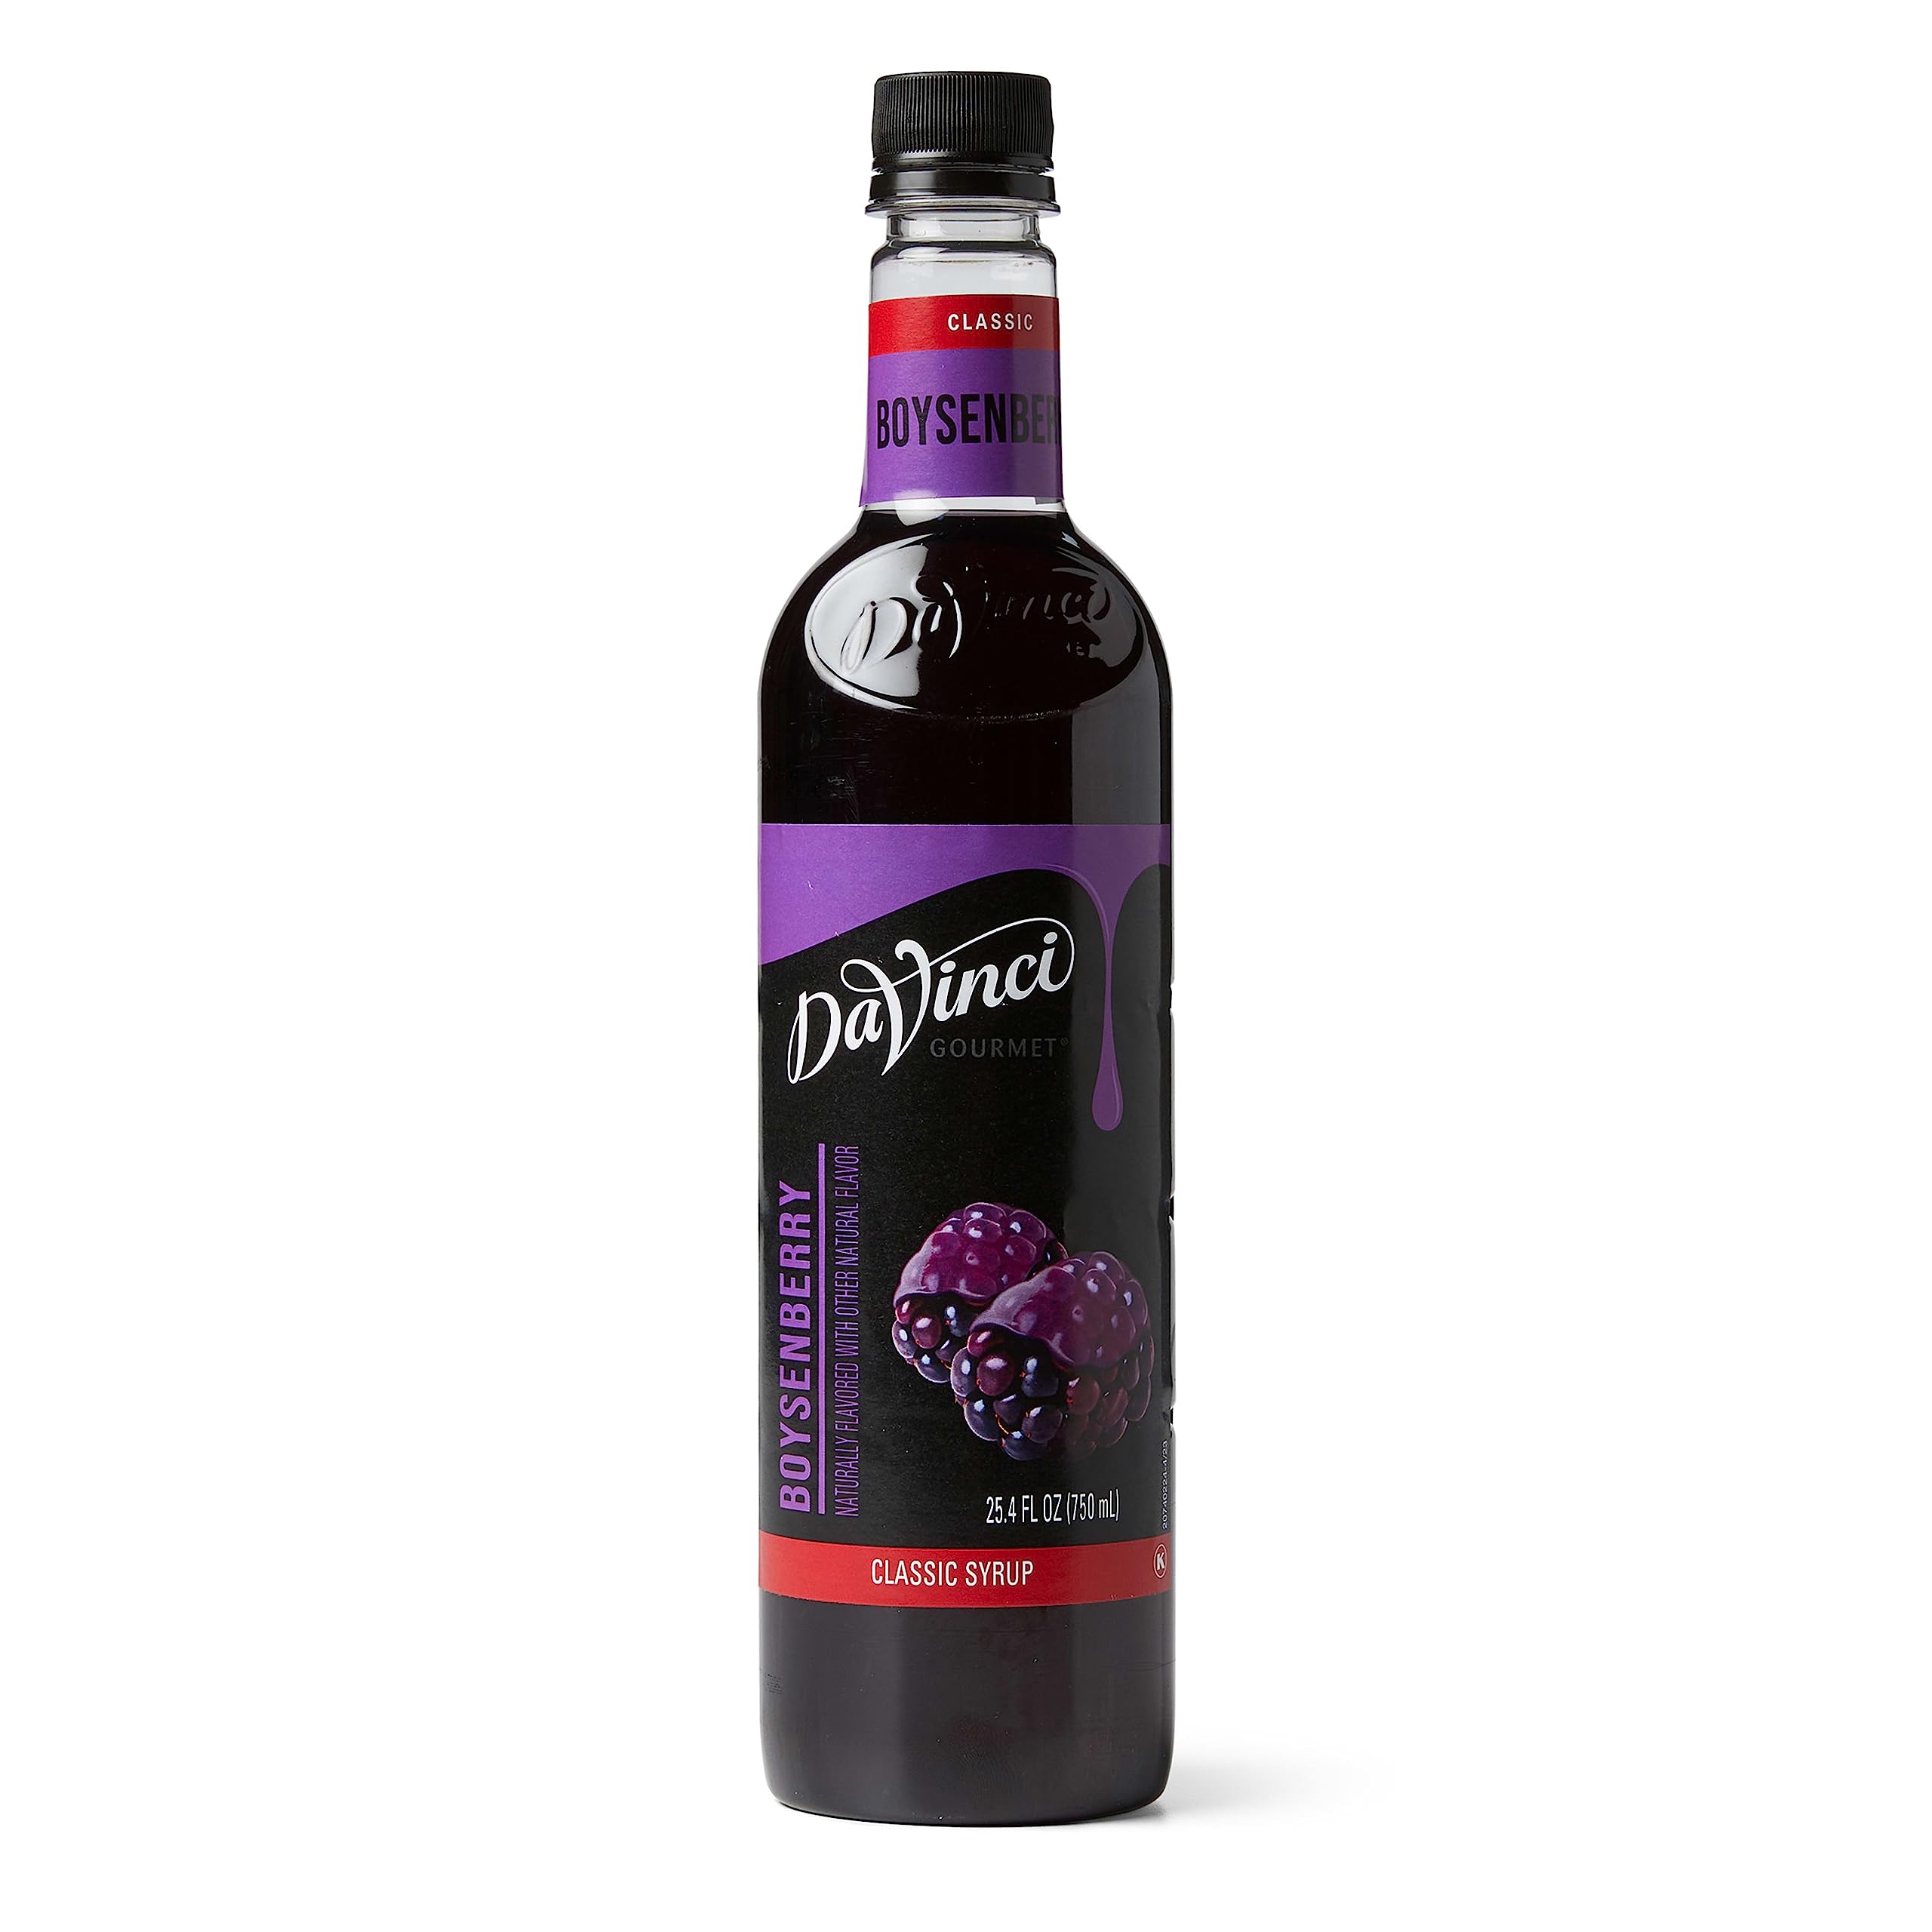 25.4-Oz DaVinci Gourmet Syrup (Boysenberry) $4.02 w/ S&S + Free Shipping w/ Prime or on orders over $35